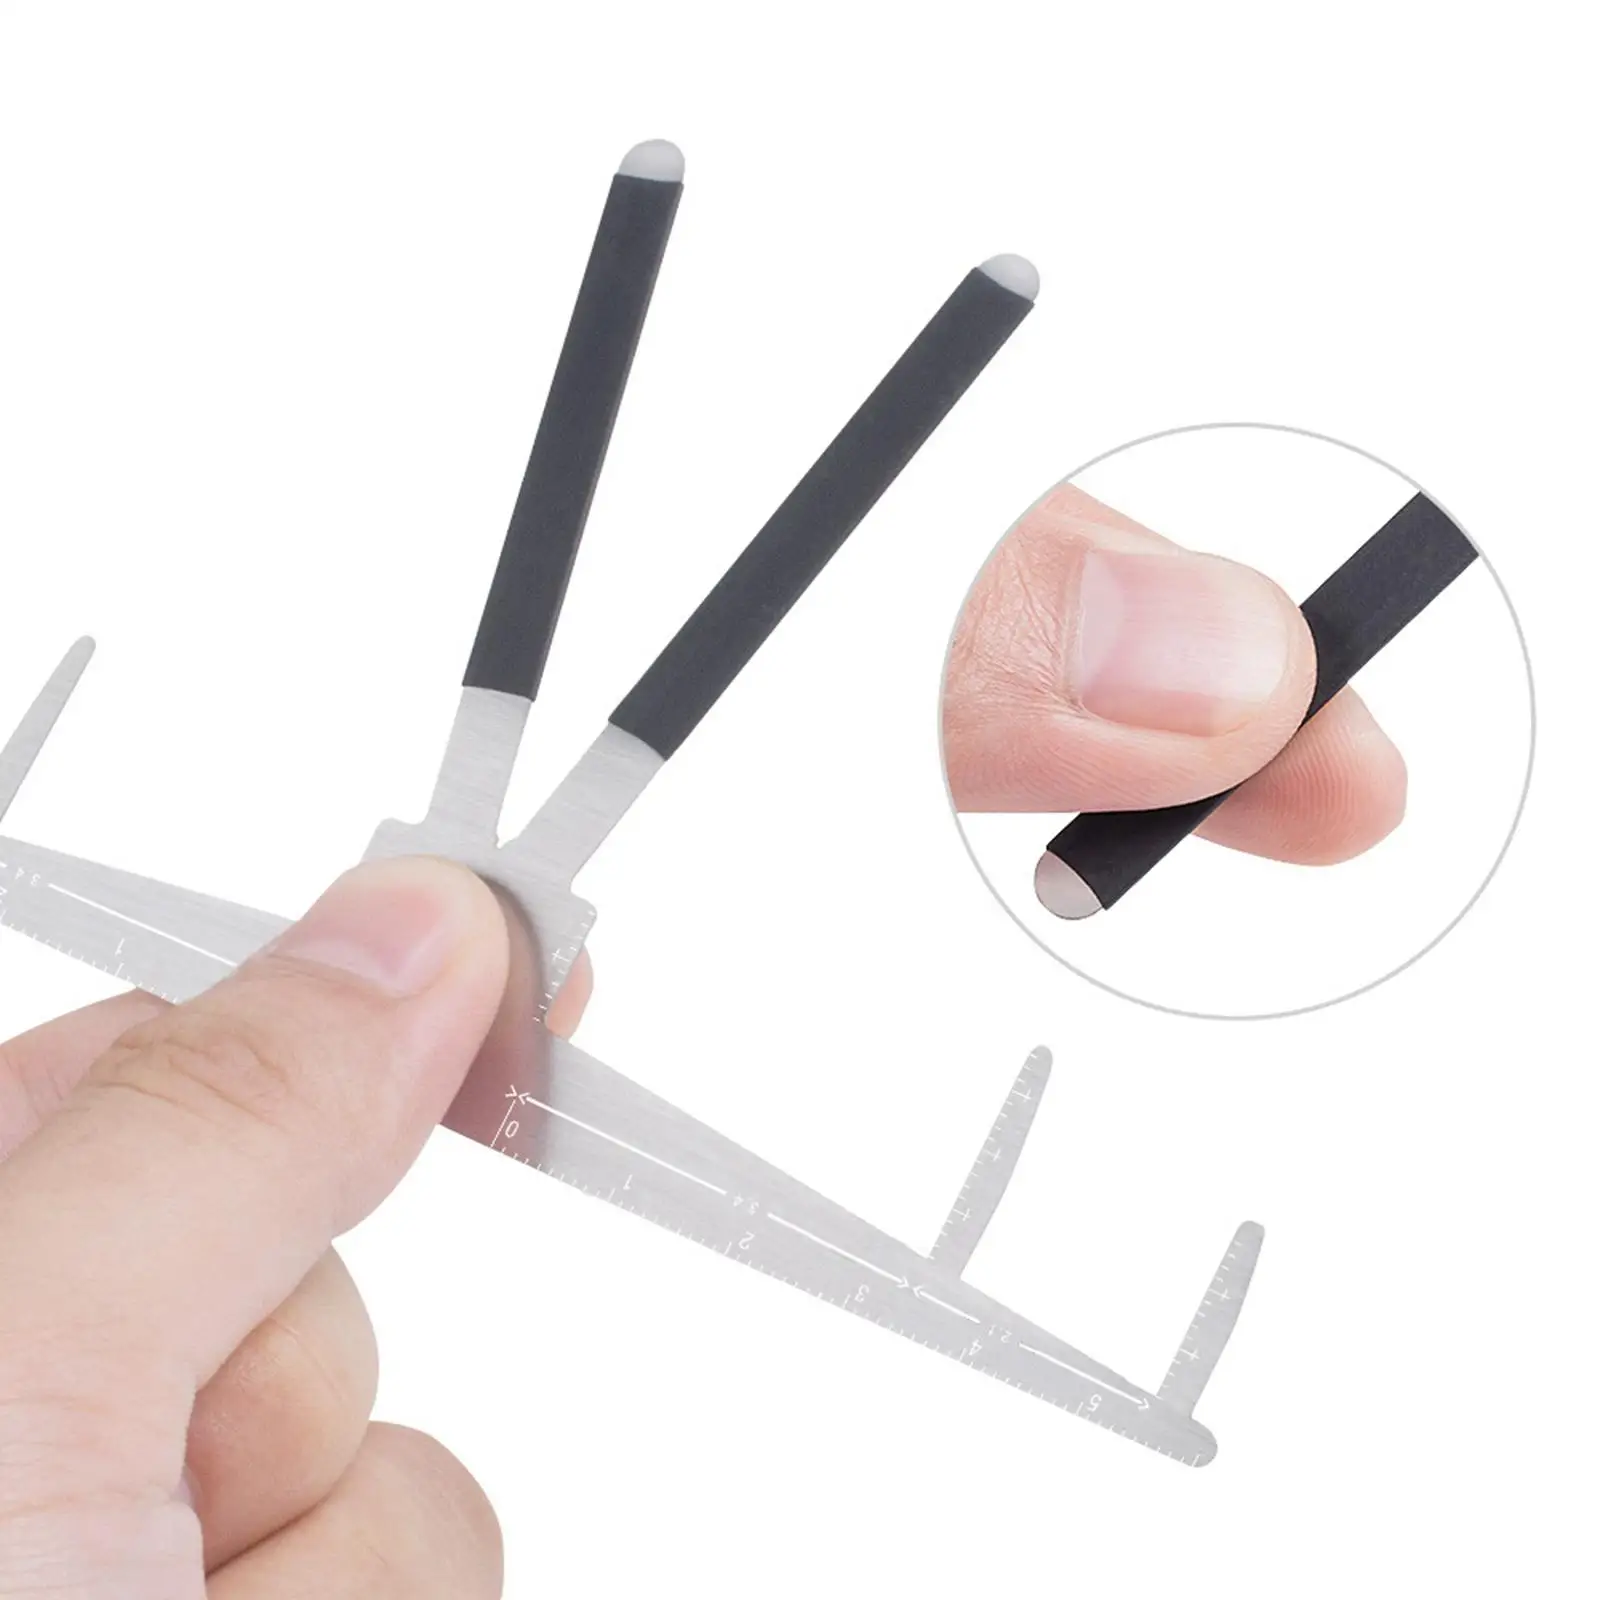 Eyebrow Ruler  Positioning Grooming Stencil Tool Makeup Stencil for Eyebrow